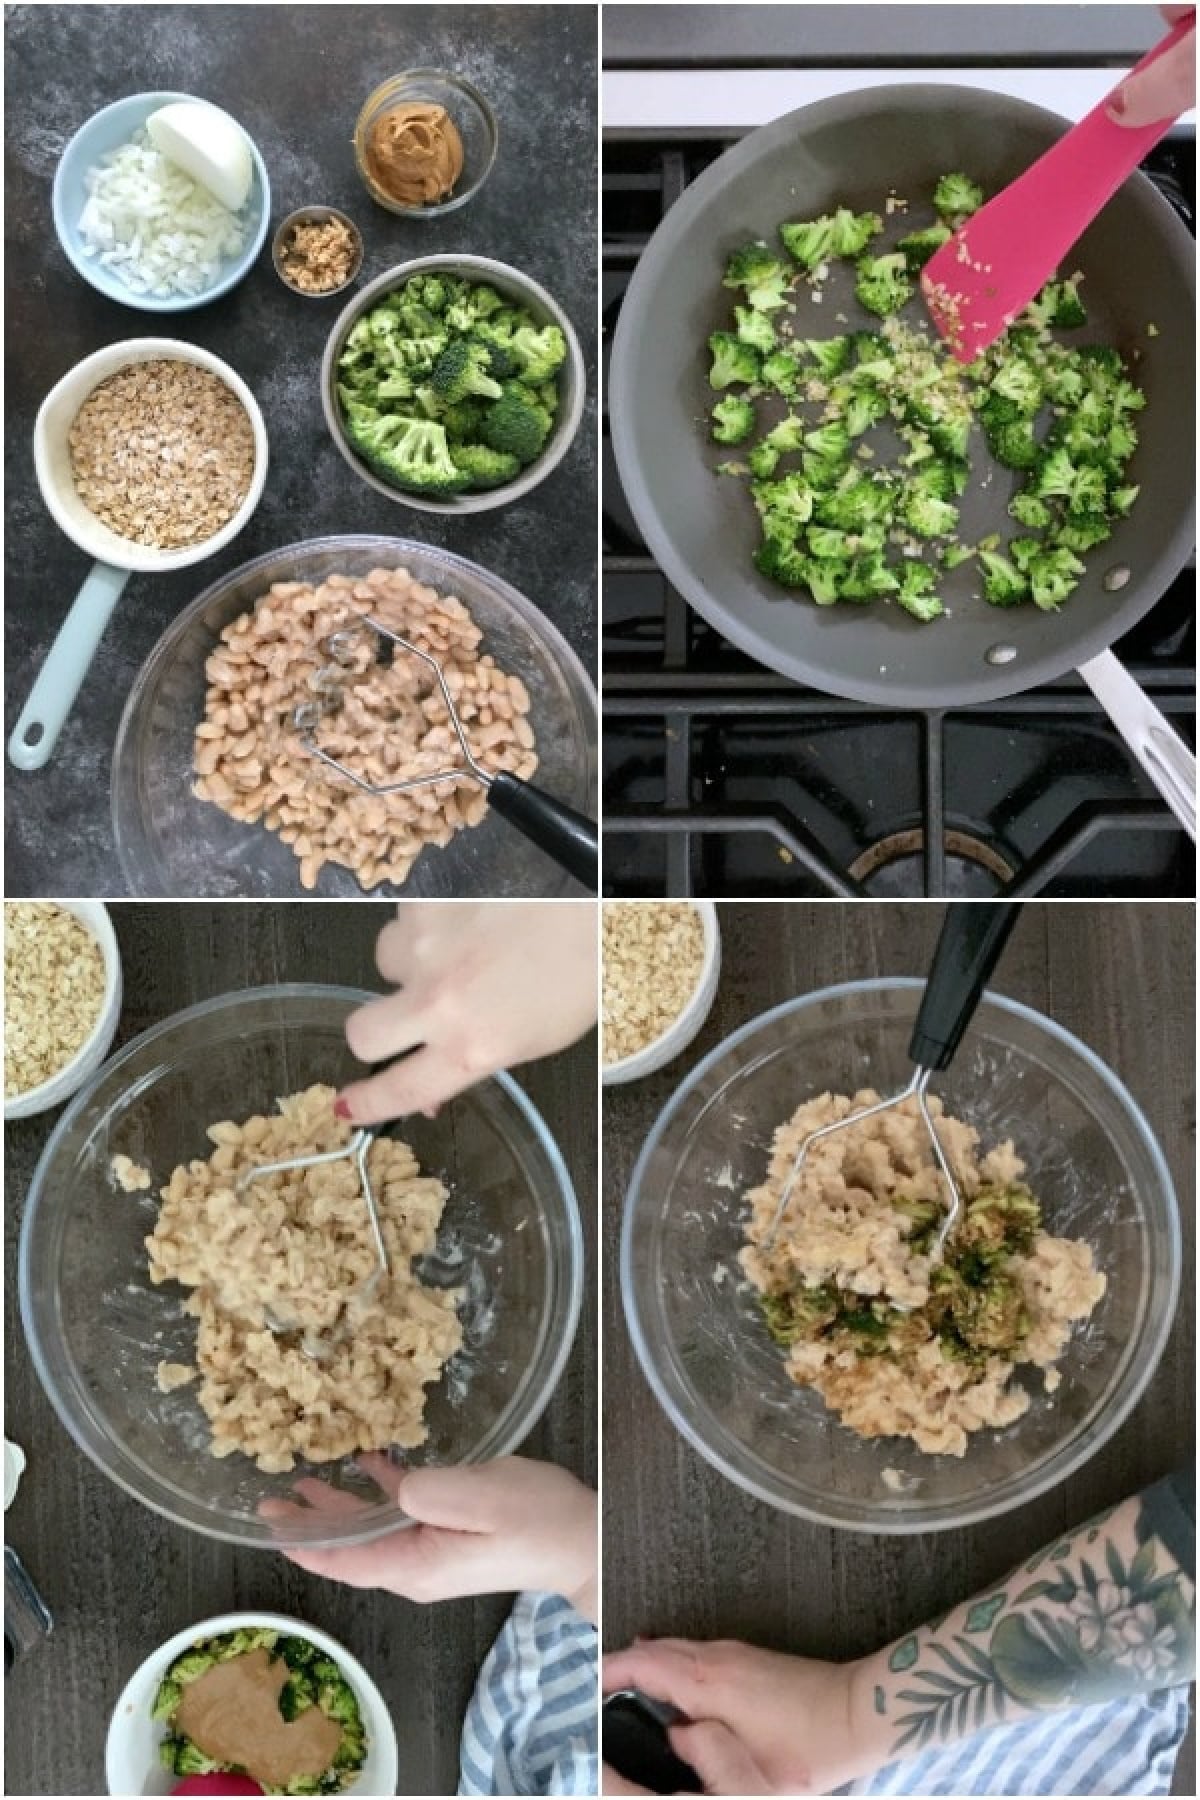 photo collage showing how to make white bean veggie burgers: overhead shot of ingredients, saute onion garlic broccoli, mash beans, combine